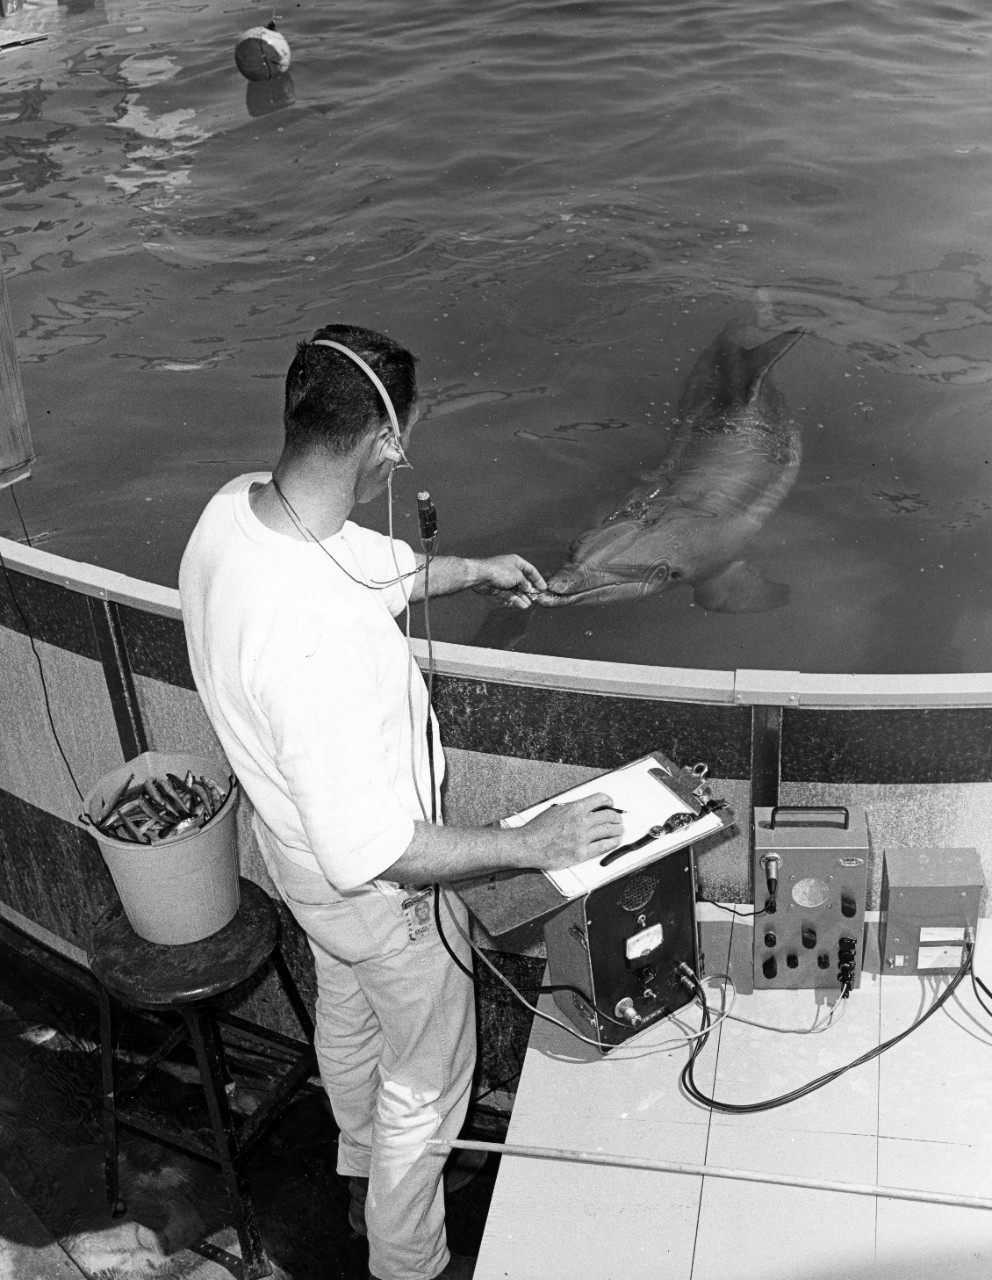 A staff member of the Naval Missile Center Marine Biology Facility, Point Mugu, CA, conducts a test with a porpoise. Such checks on the health of the animals are important to success in the study of porpoise physiology. Results of this work are expected to contribute valuable information to naval science and "man under the sea programs". June 15, 1965. 